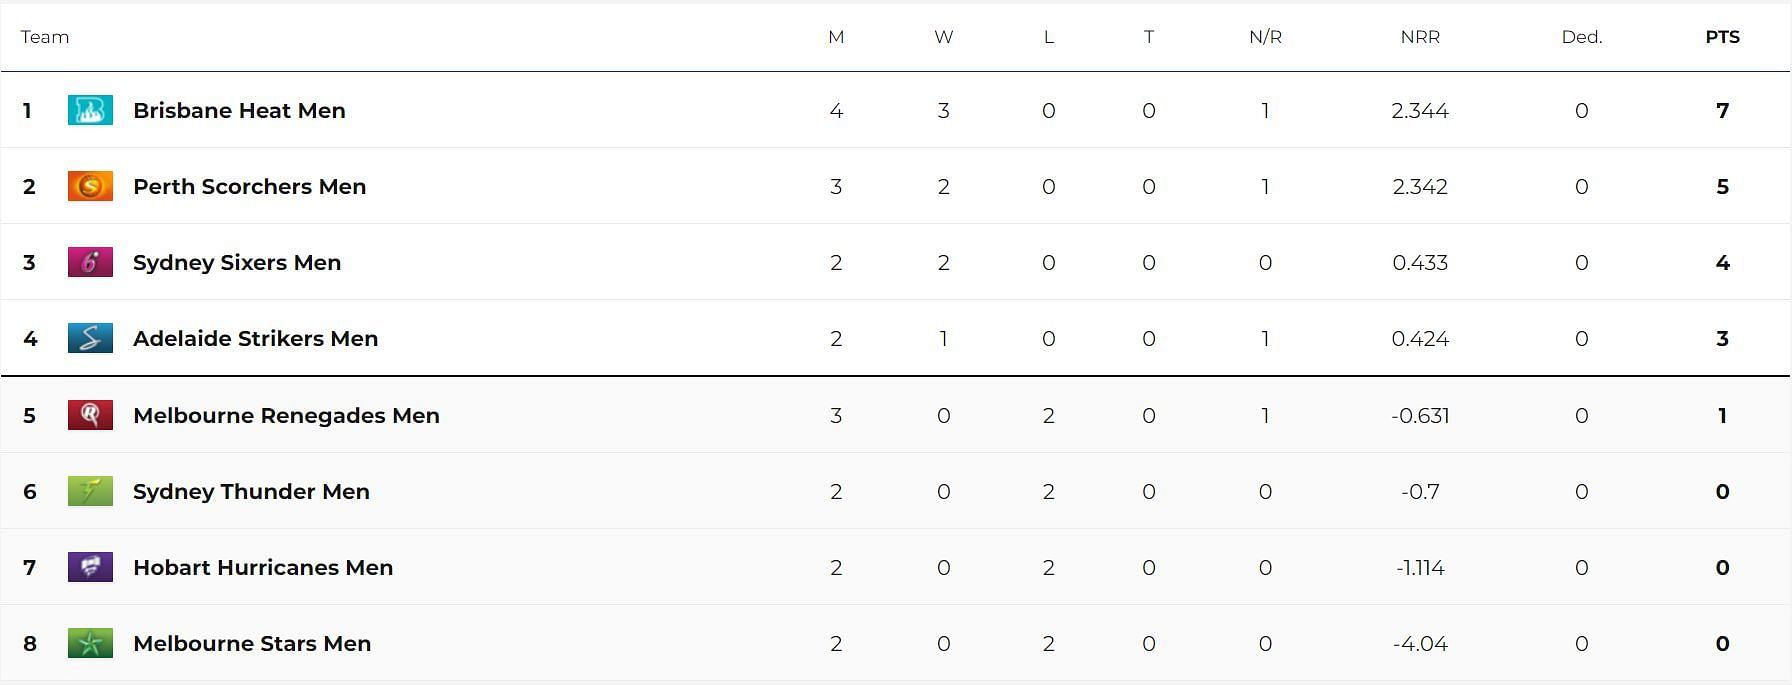 Updated Points Table after Match 10 (Image Courtesy: cricket.com.au)